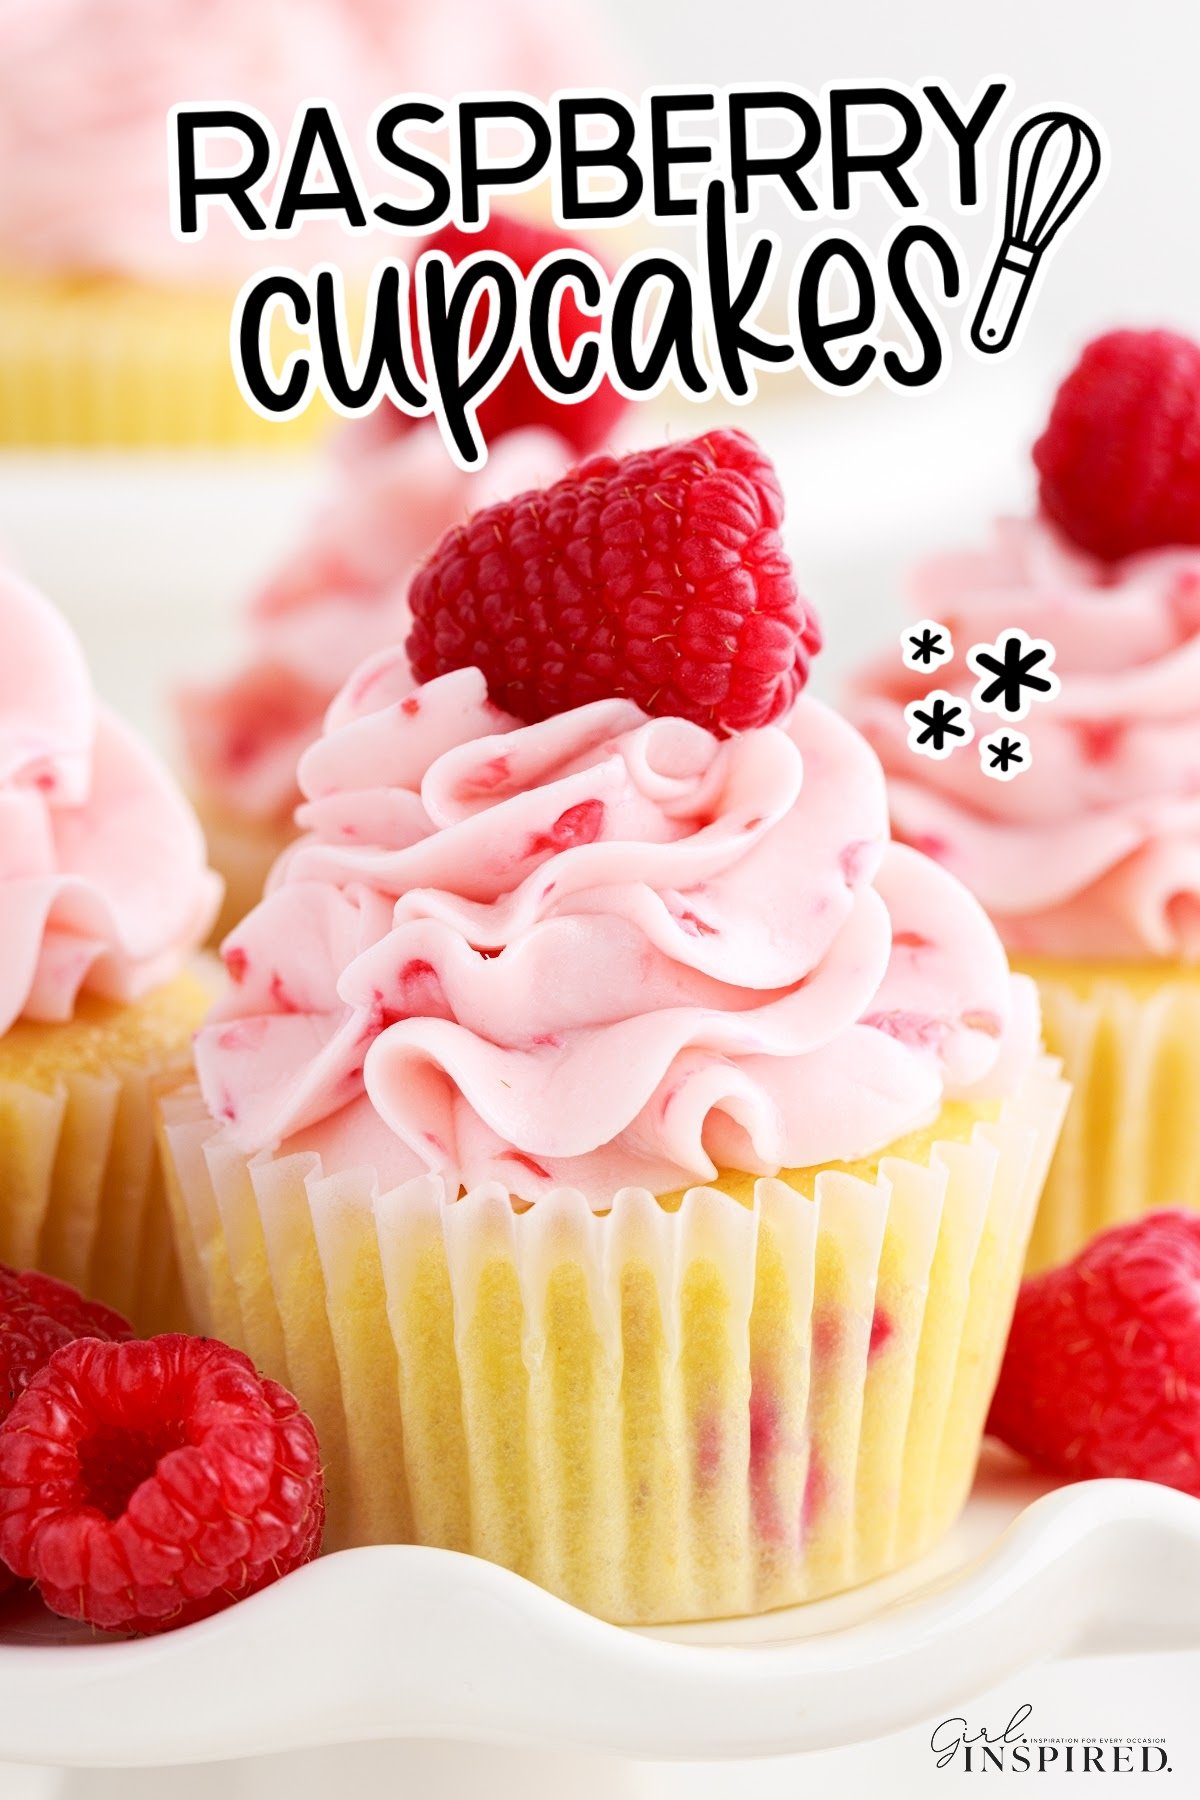 Front close up of Raspberry Cupcakes with text overlay.